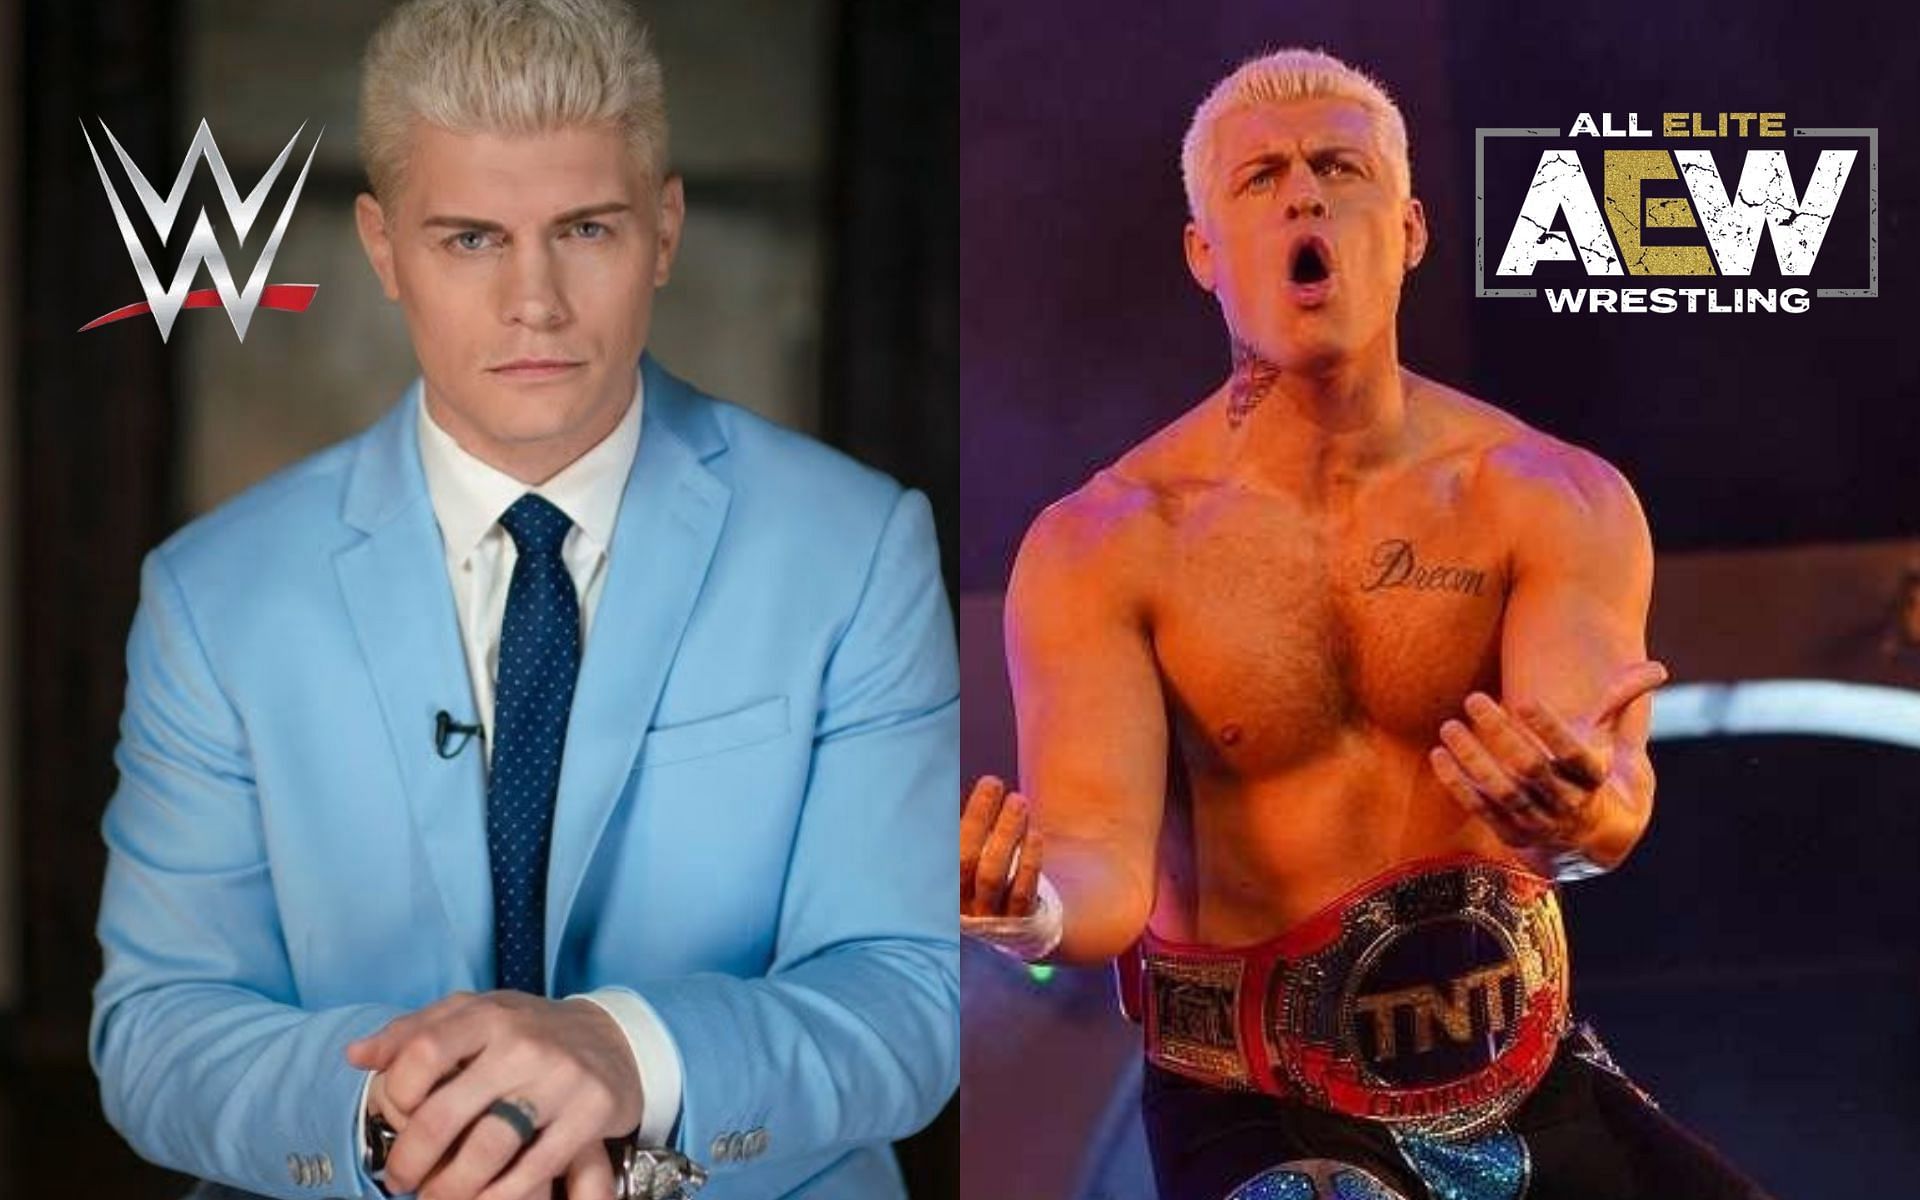 Cody Rhodes is currently out of in-ring action recovering from a pectoral injury